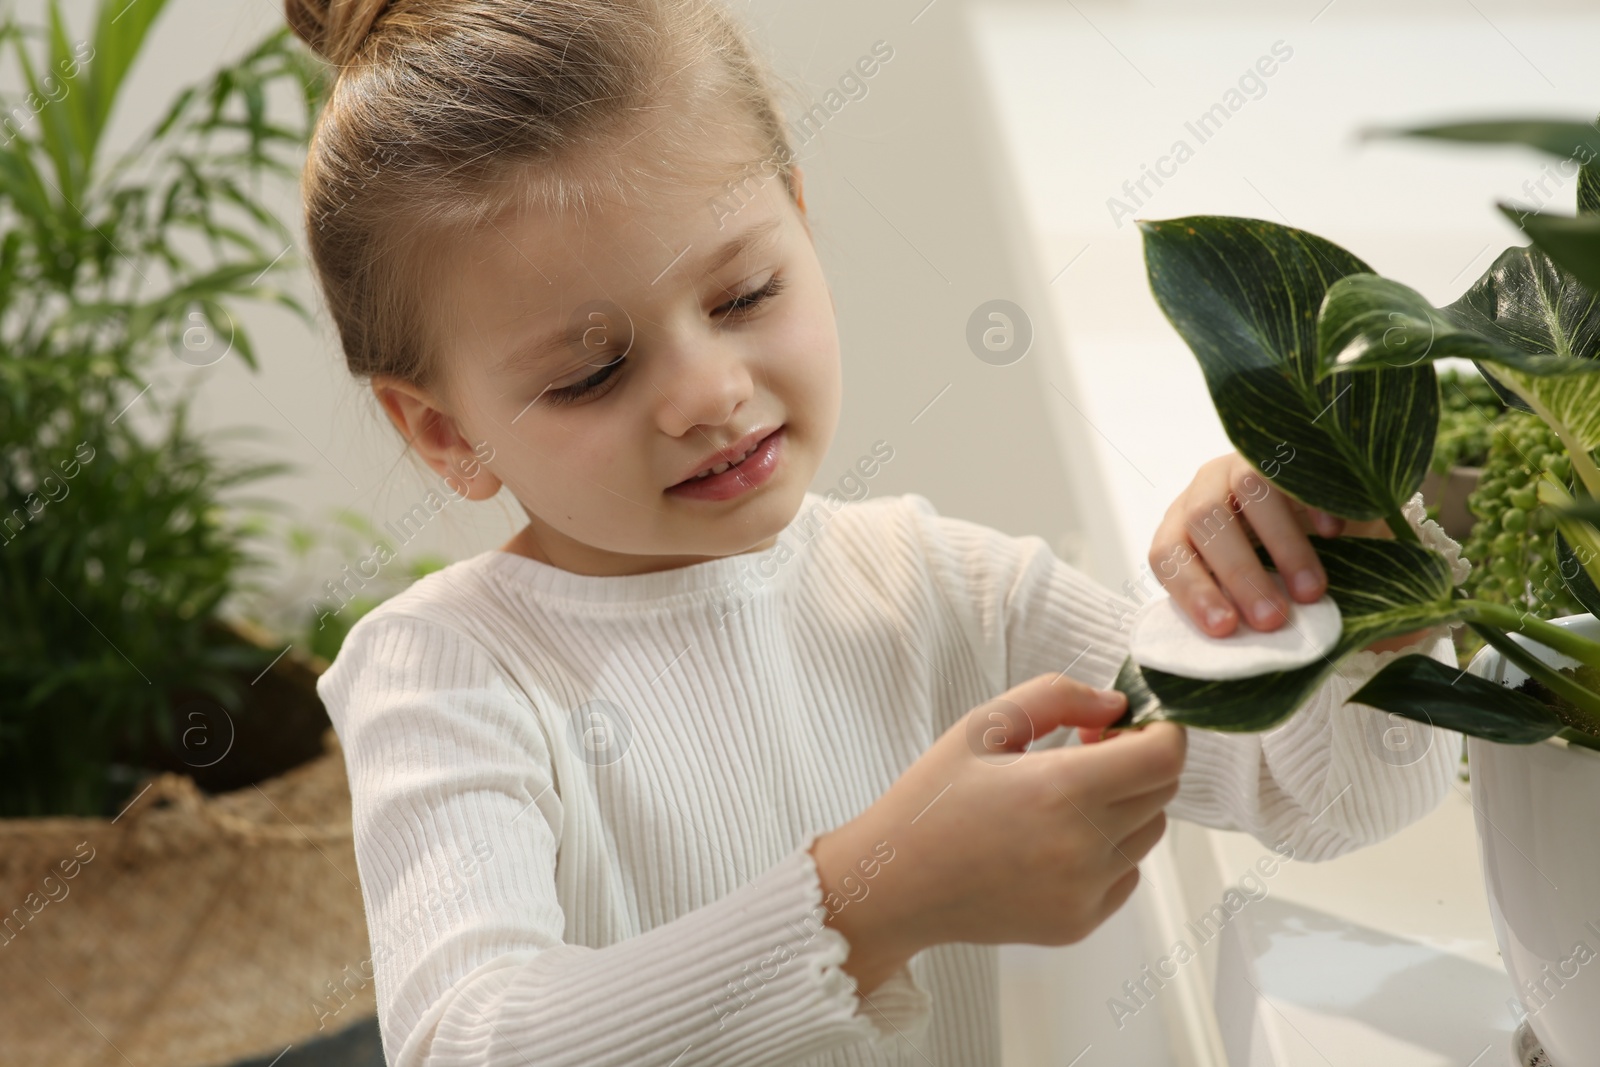 Photo of Cute little girl wiping plant's leaves with cotton pad at home. House decor